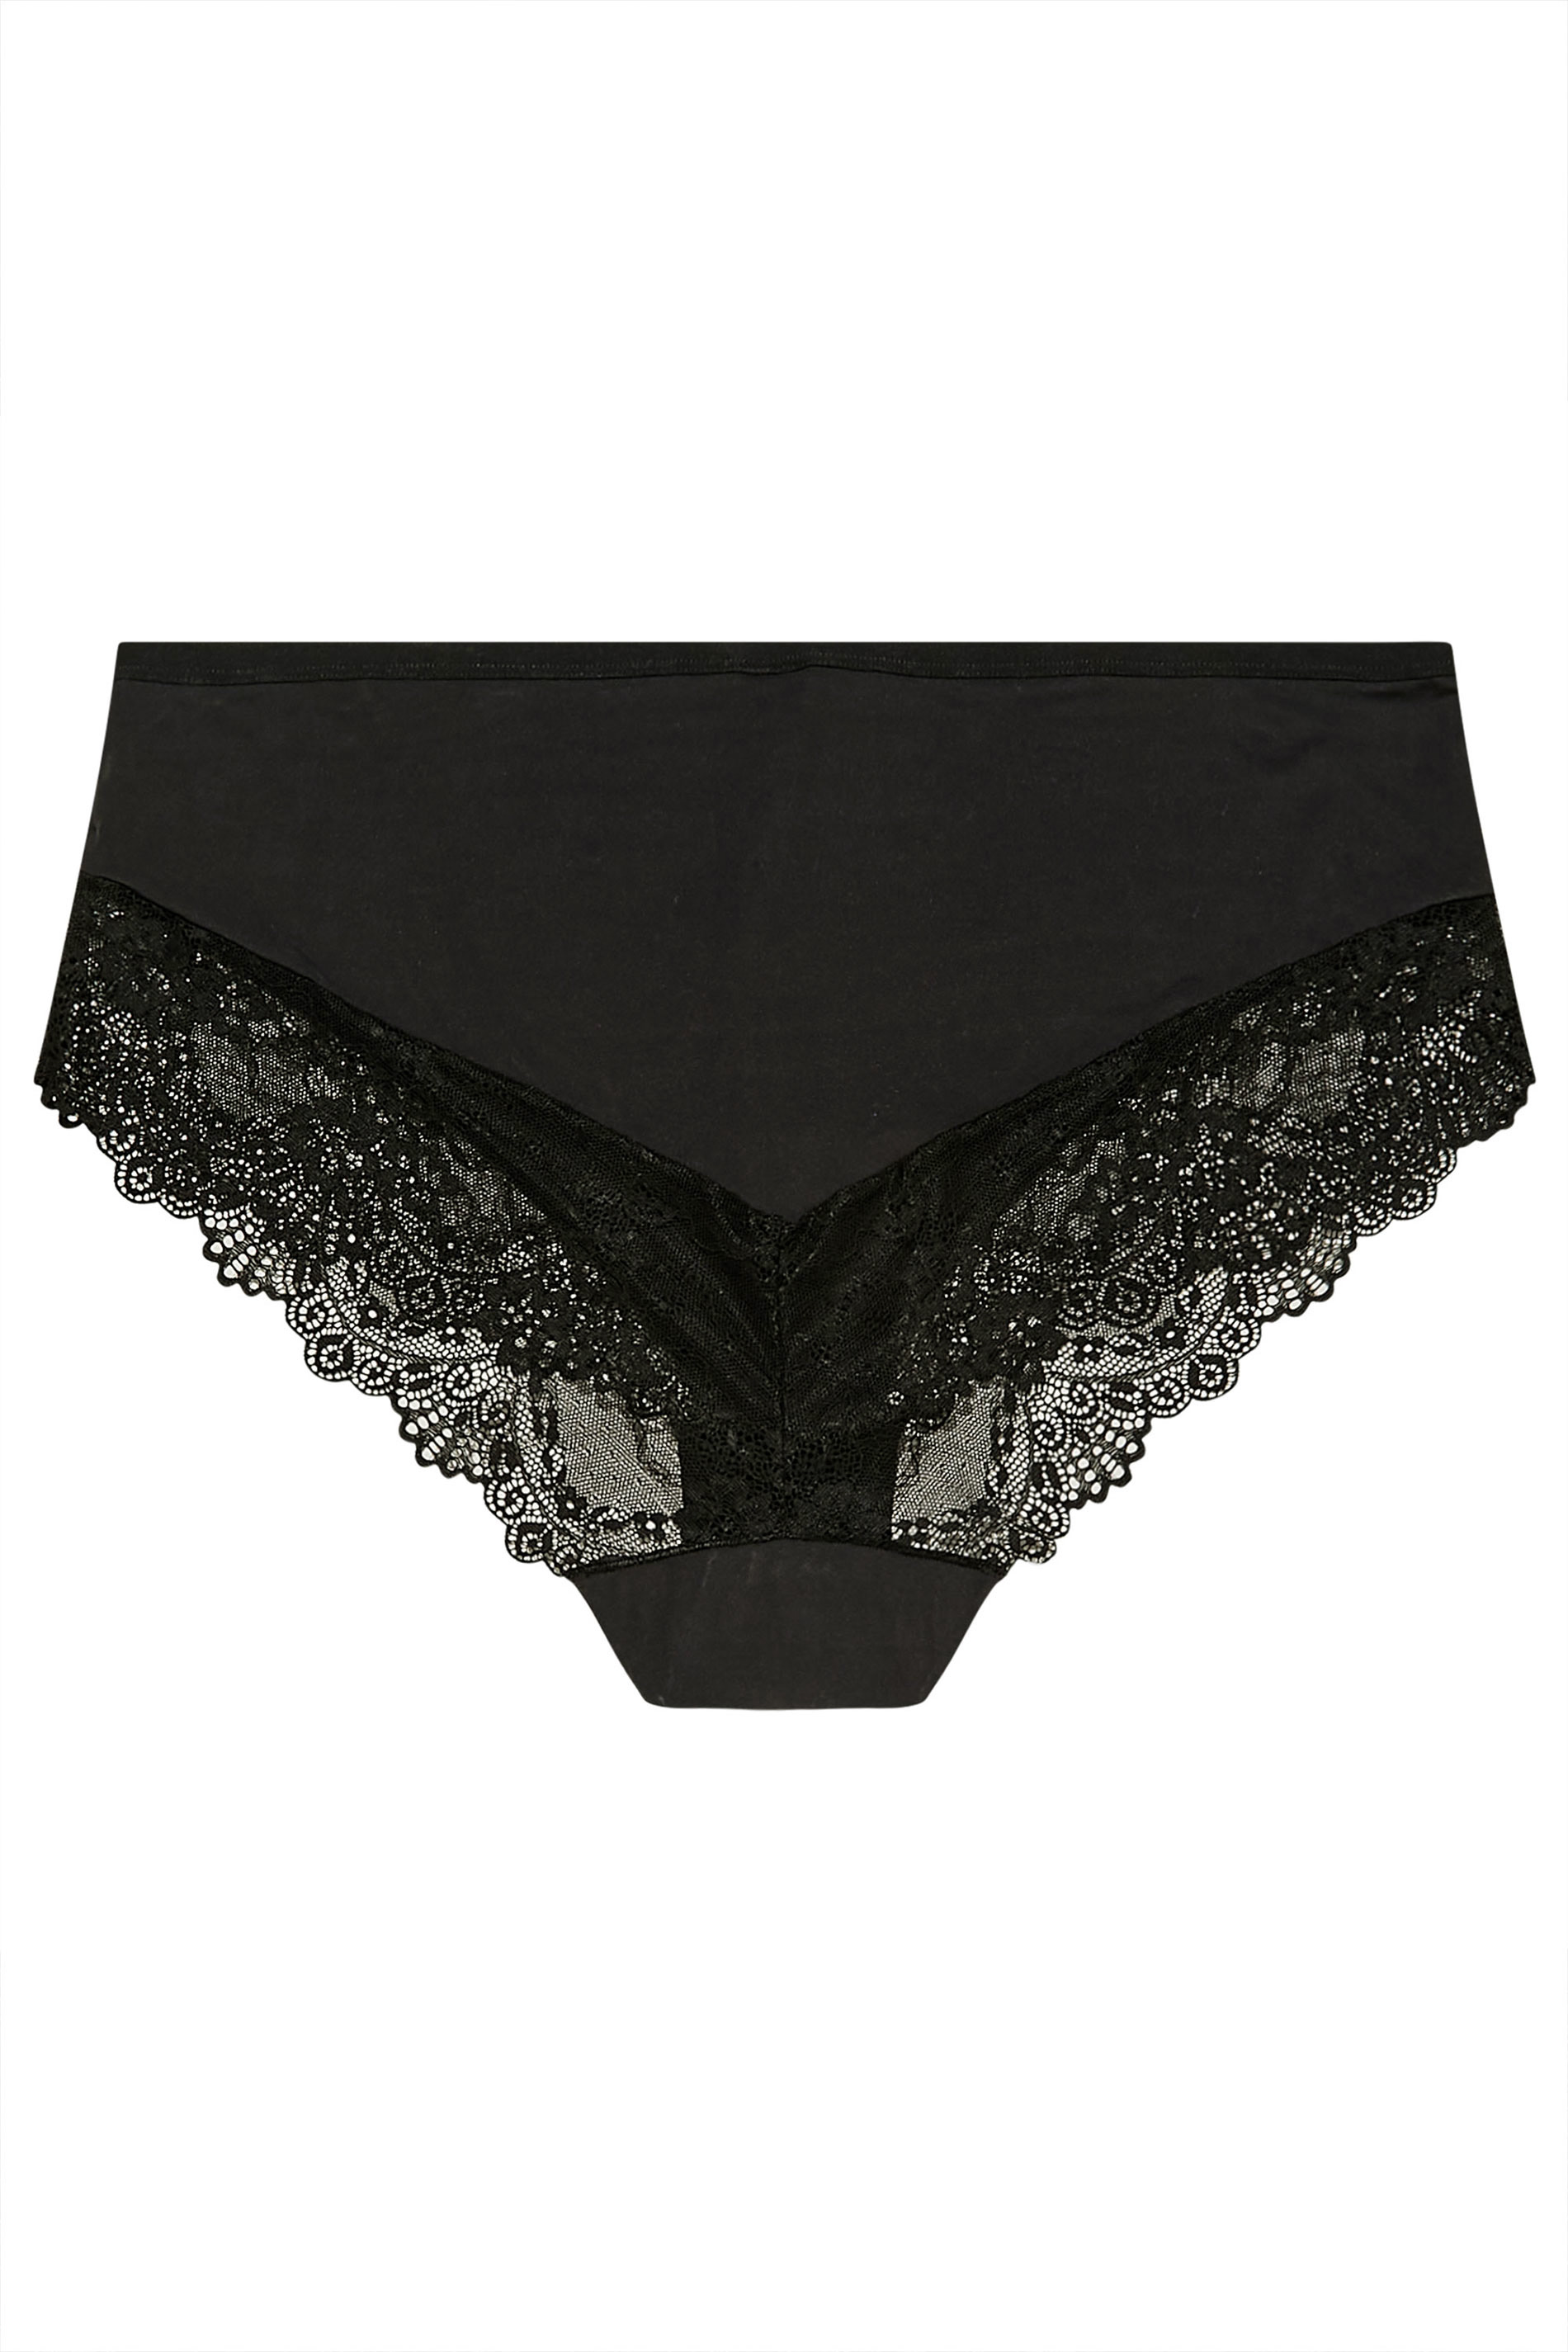 Yours Curve Black Super Soft Lace Panel High Waisted Knickers Size 14-16 | Women's Plus Size and Curve Fashion